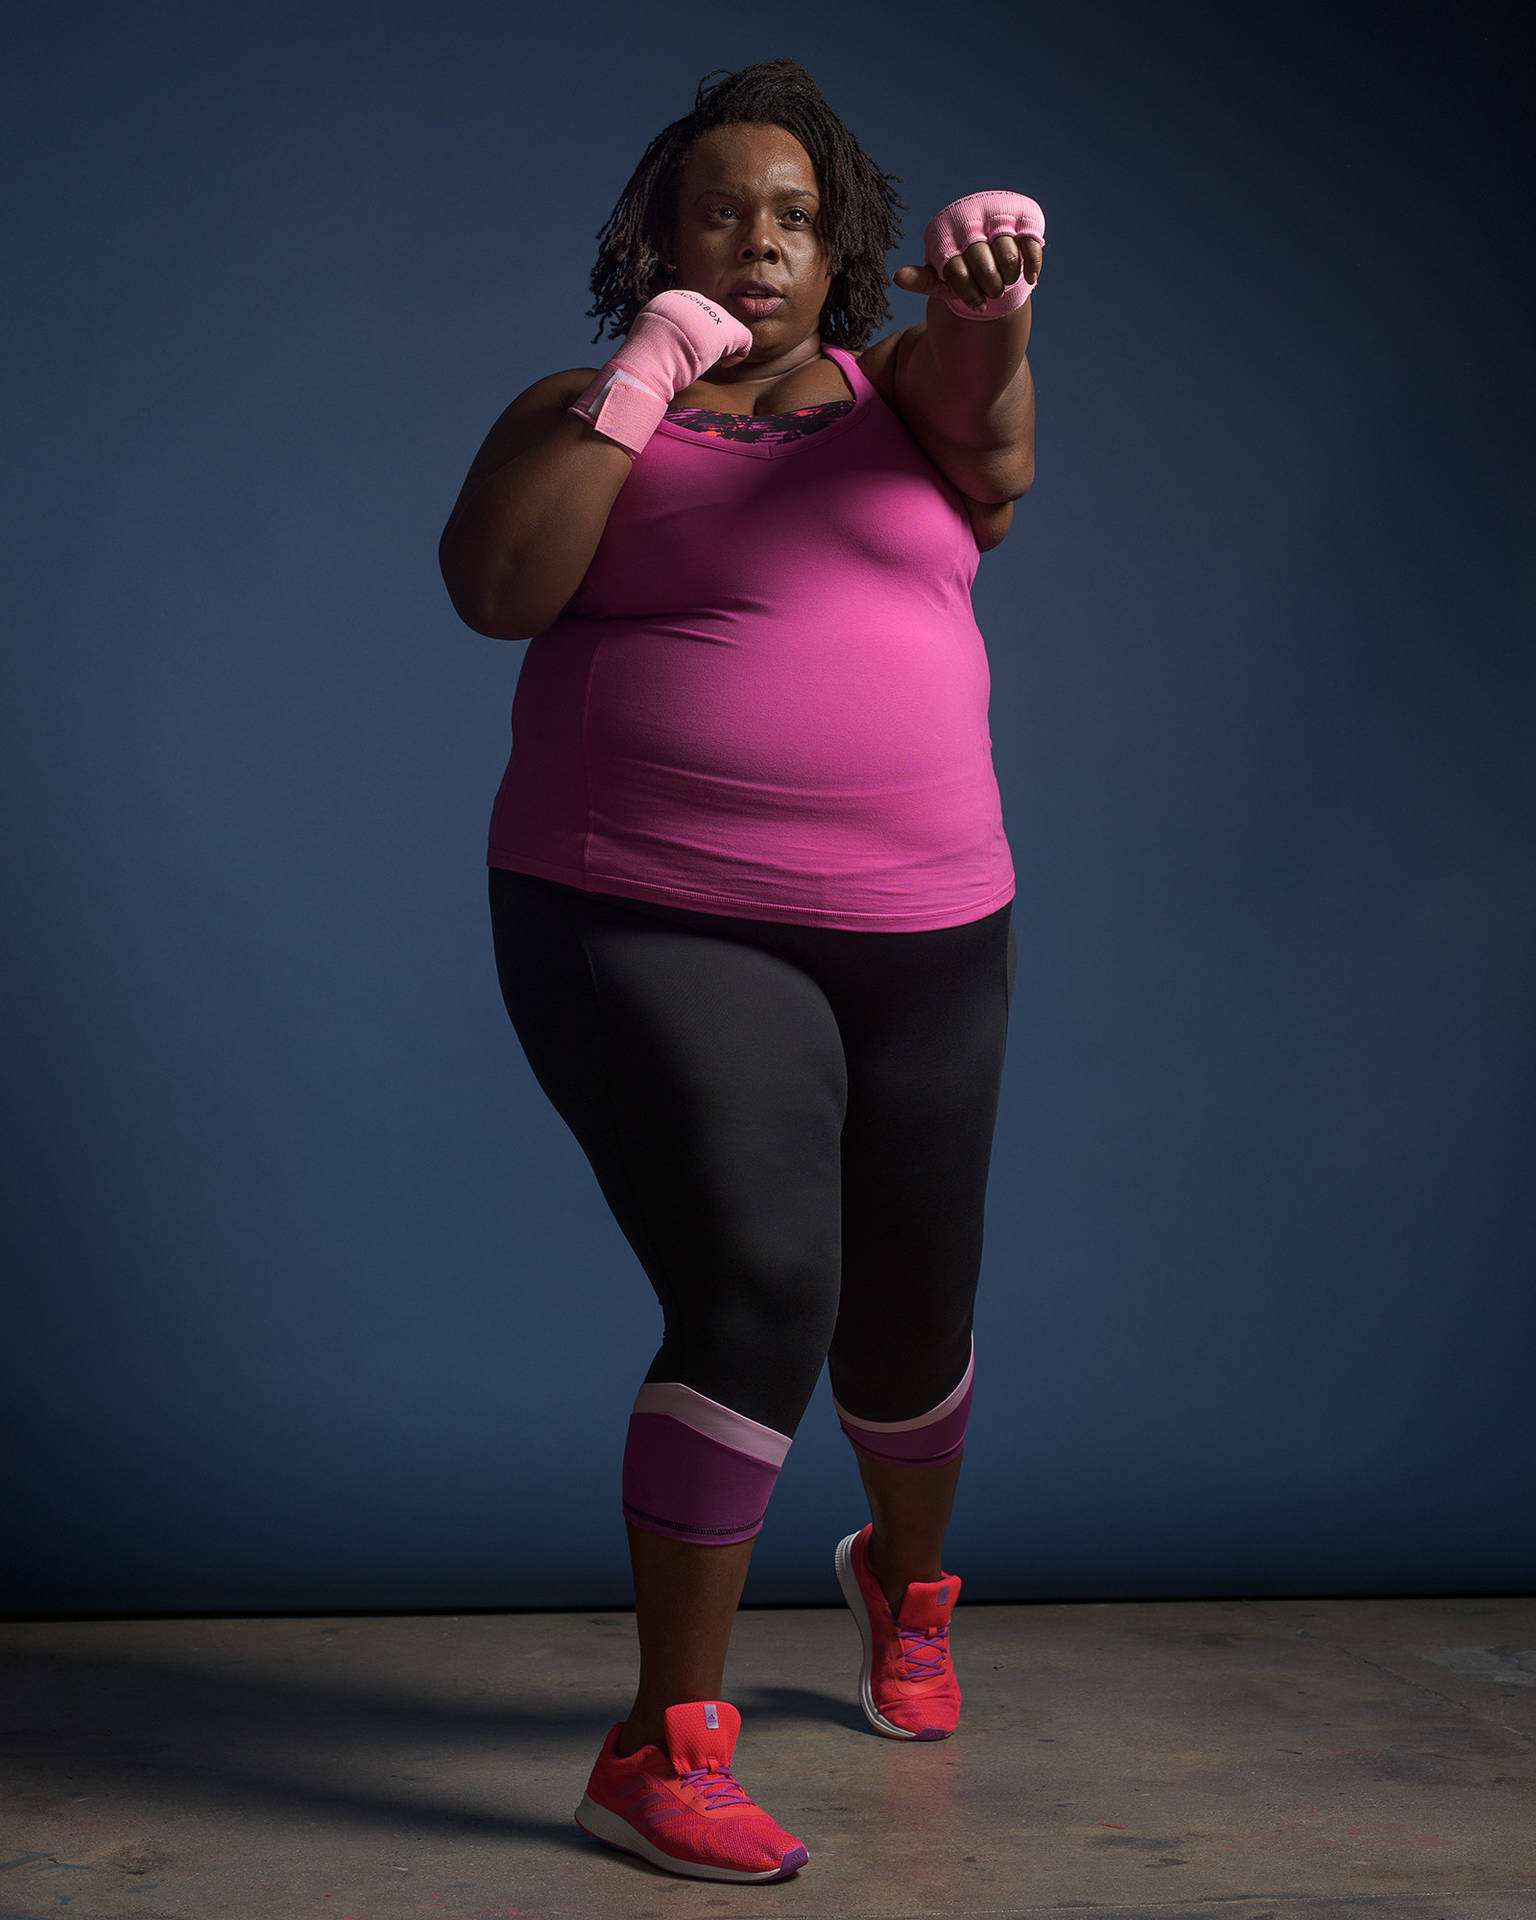 Fat Girl In A Gym Outfit Wallpaper